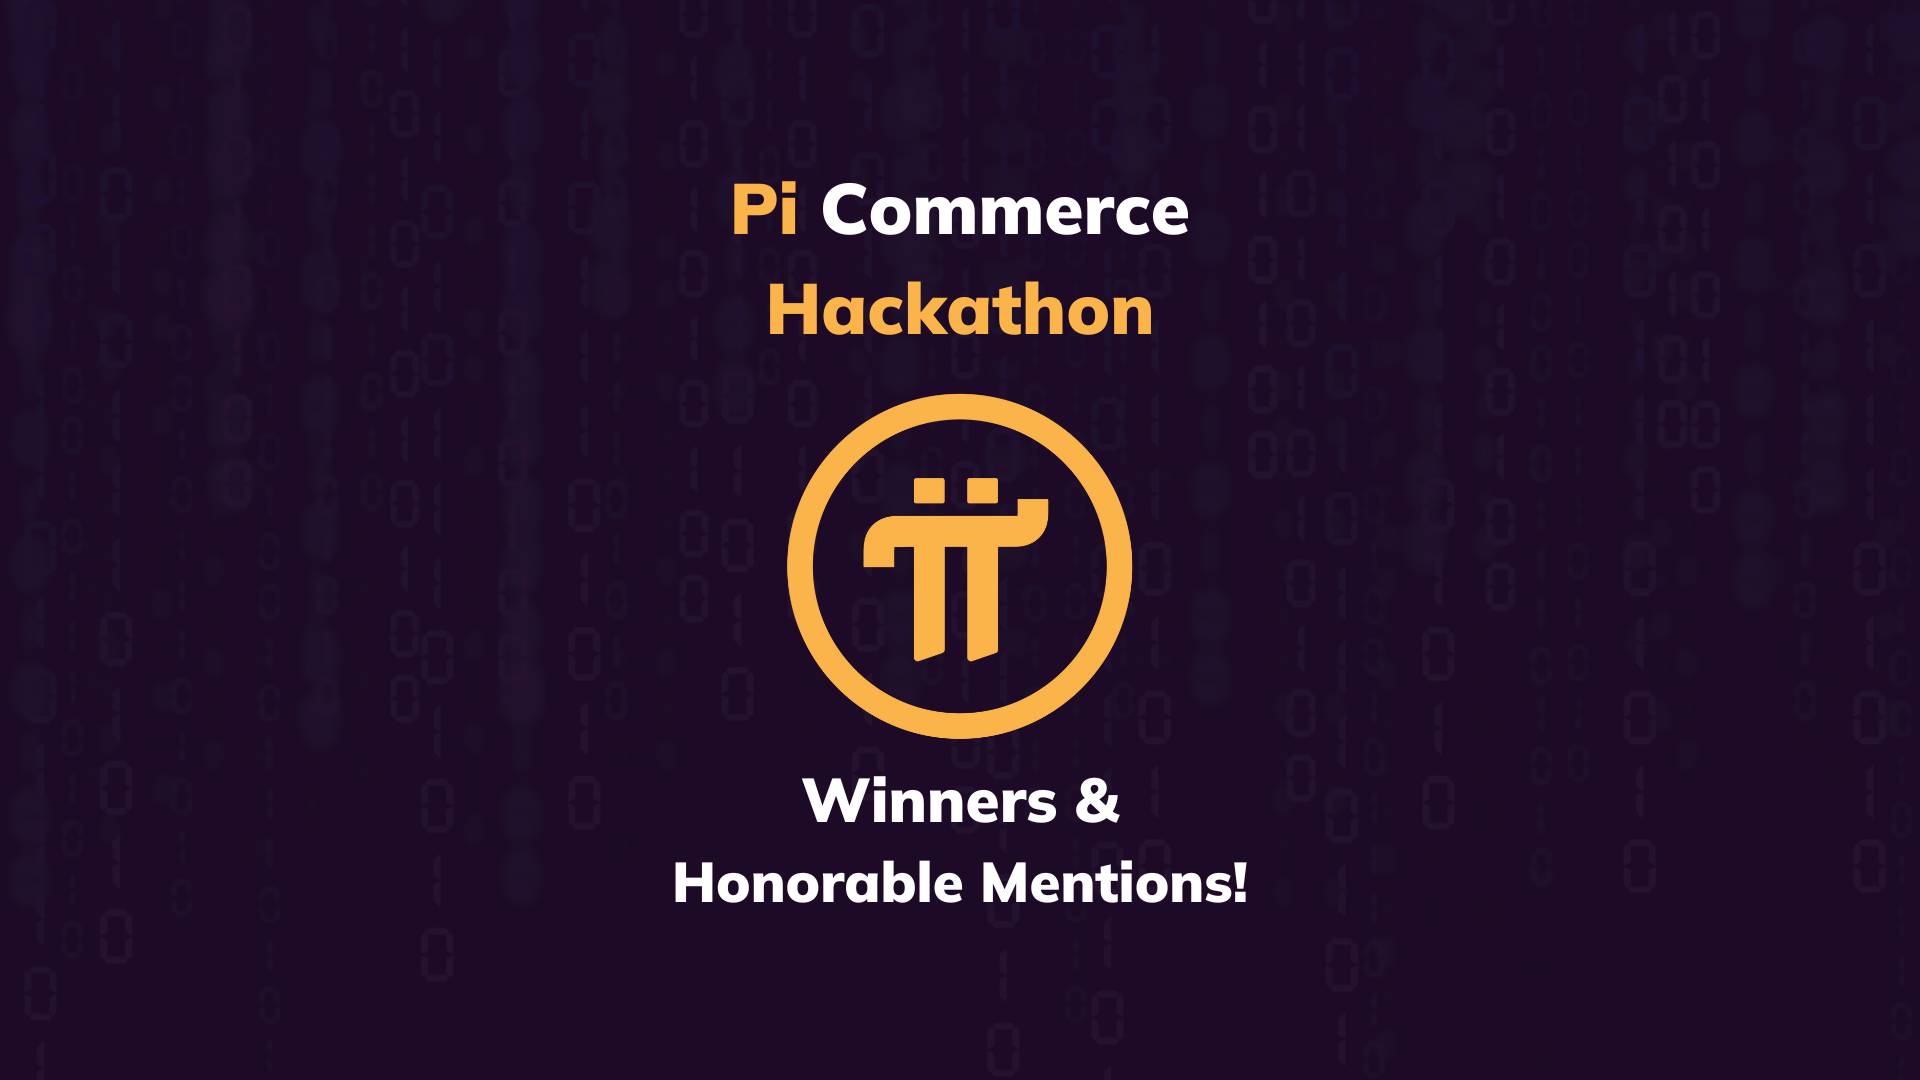 Pi Commerce Hackathon Winners and Honorable Mentions Announced!